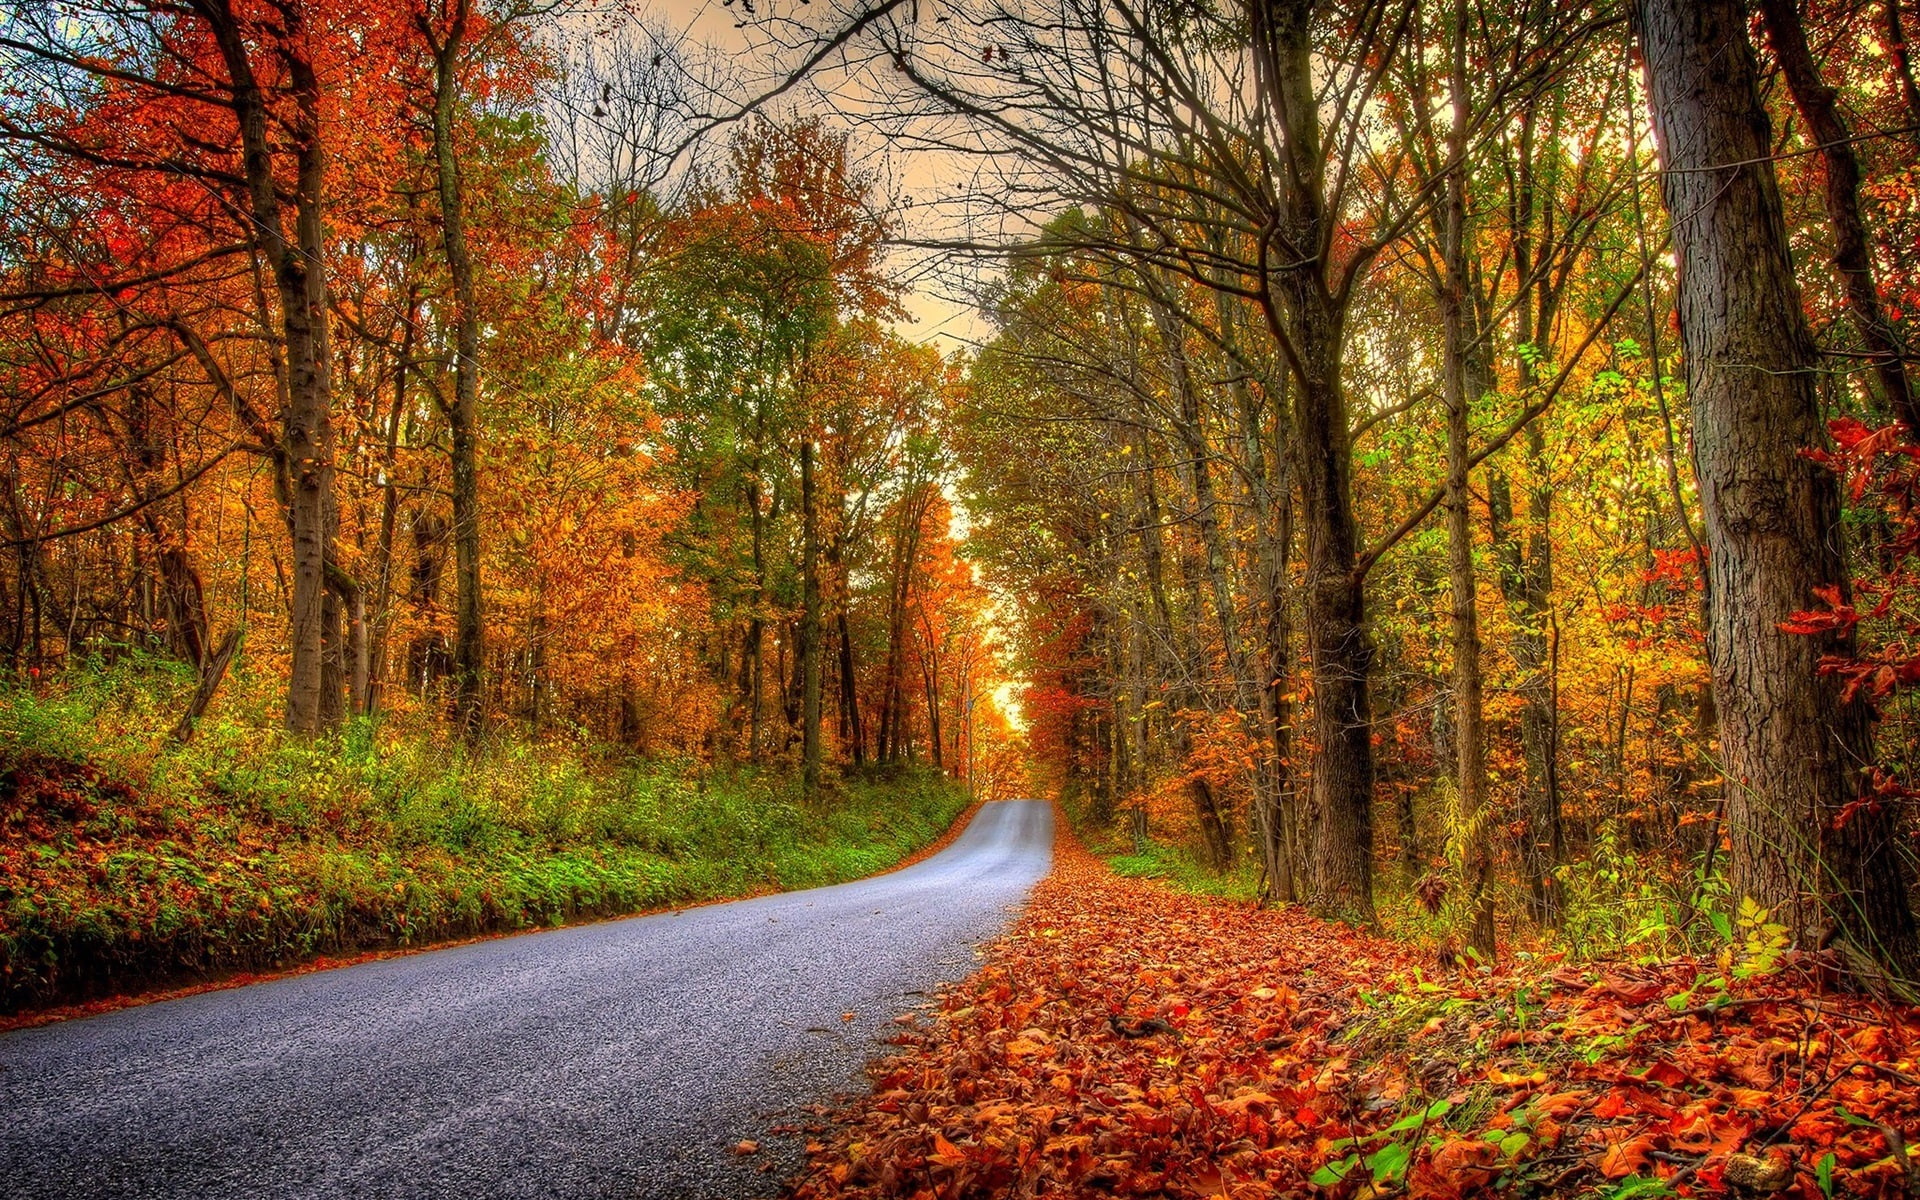 Forest, trees, leaves, colorful, road, autumn